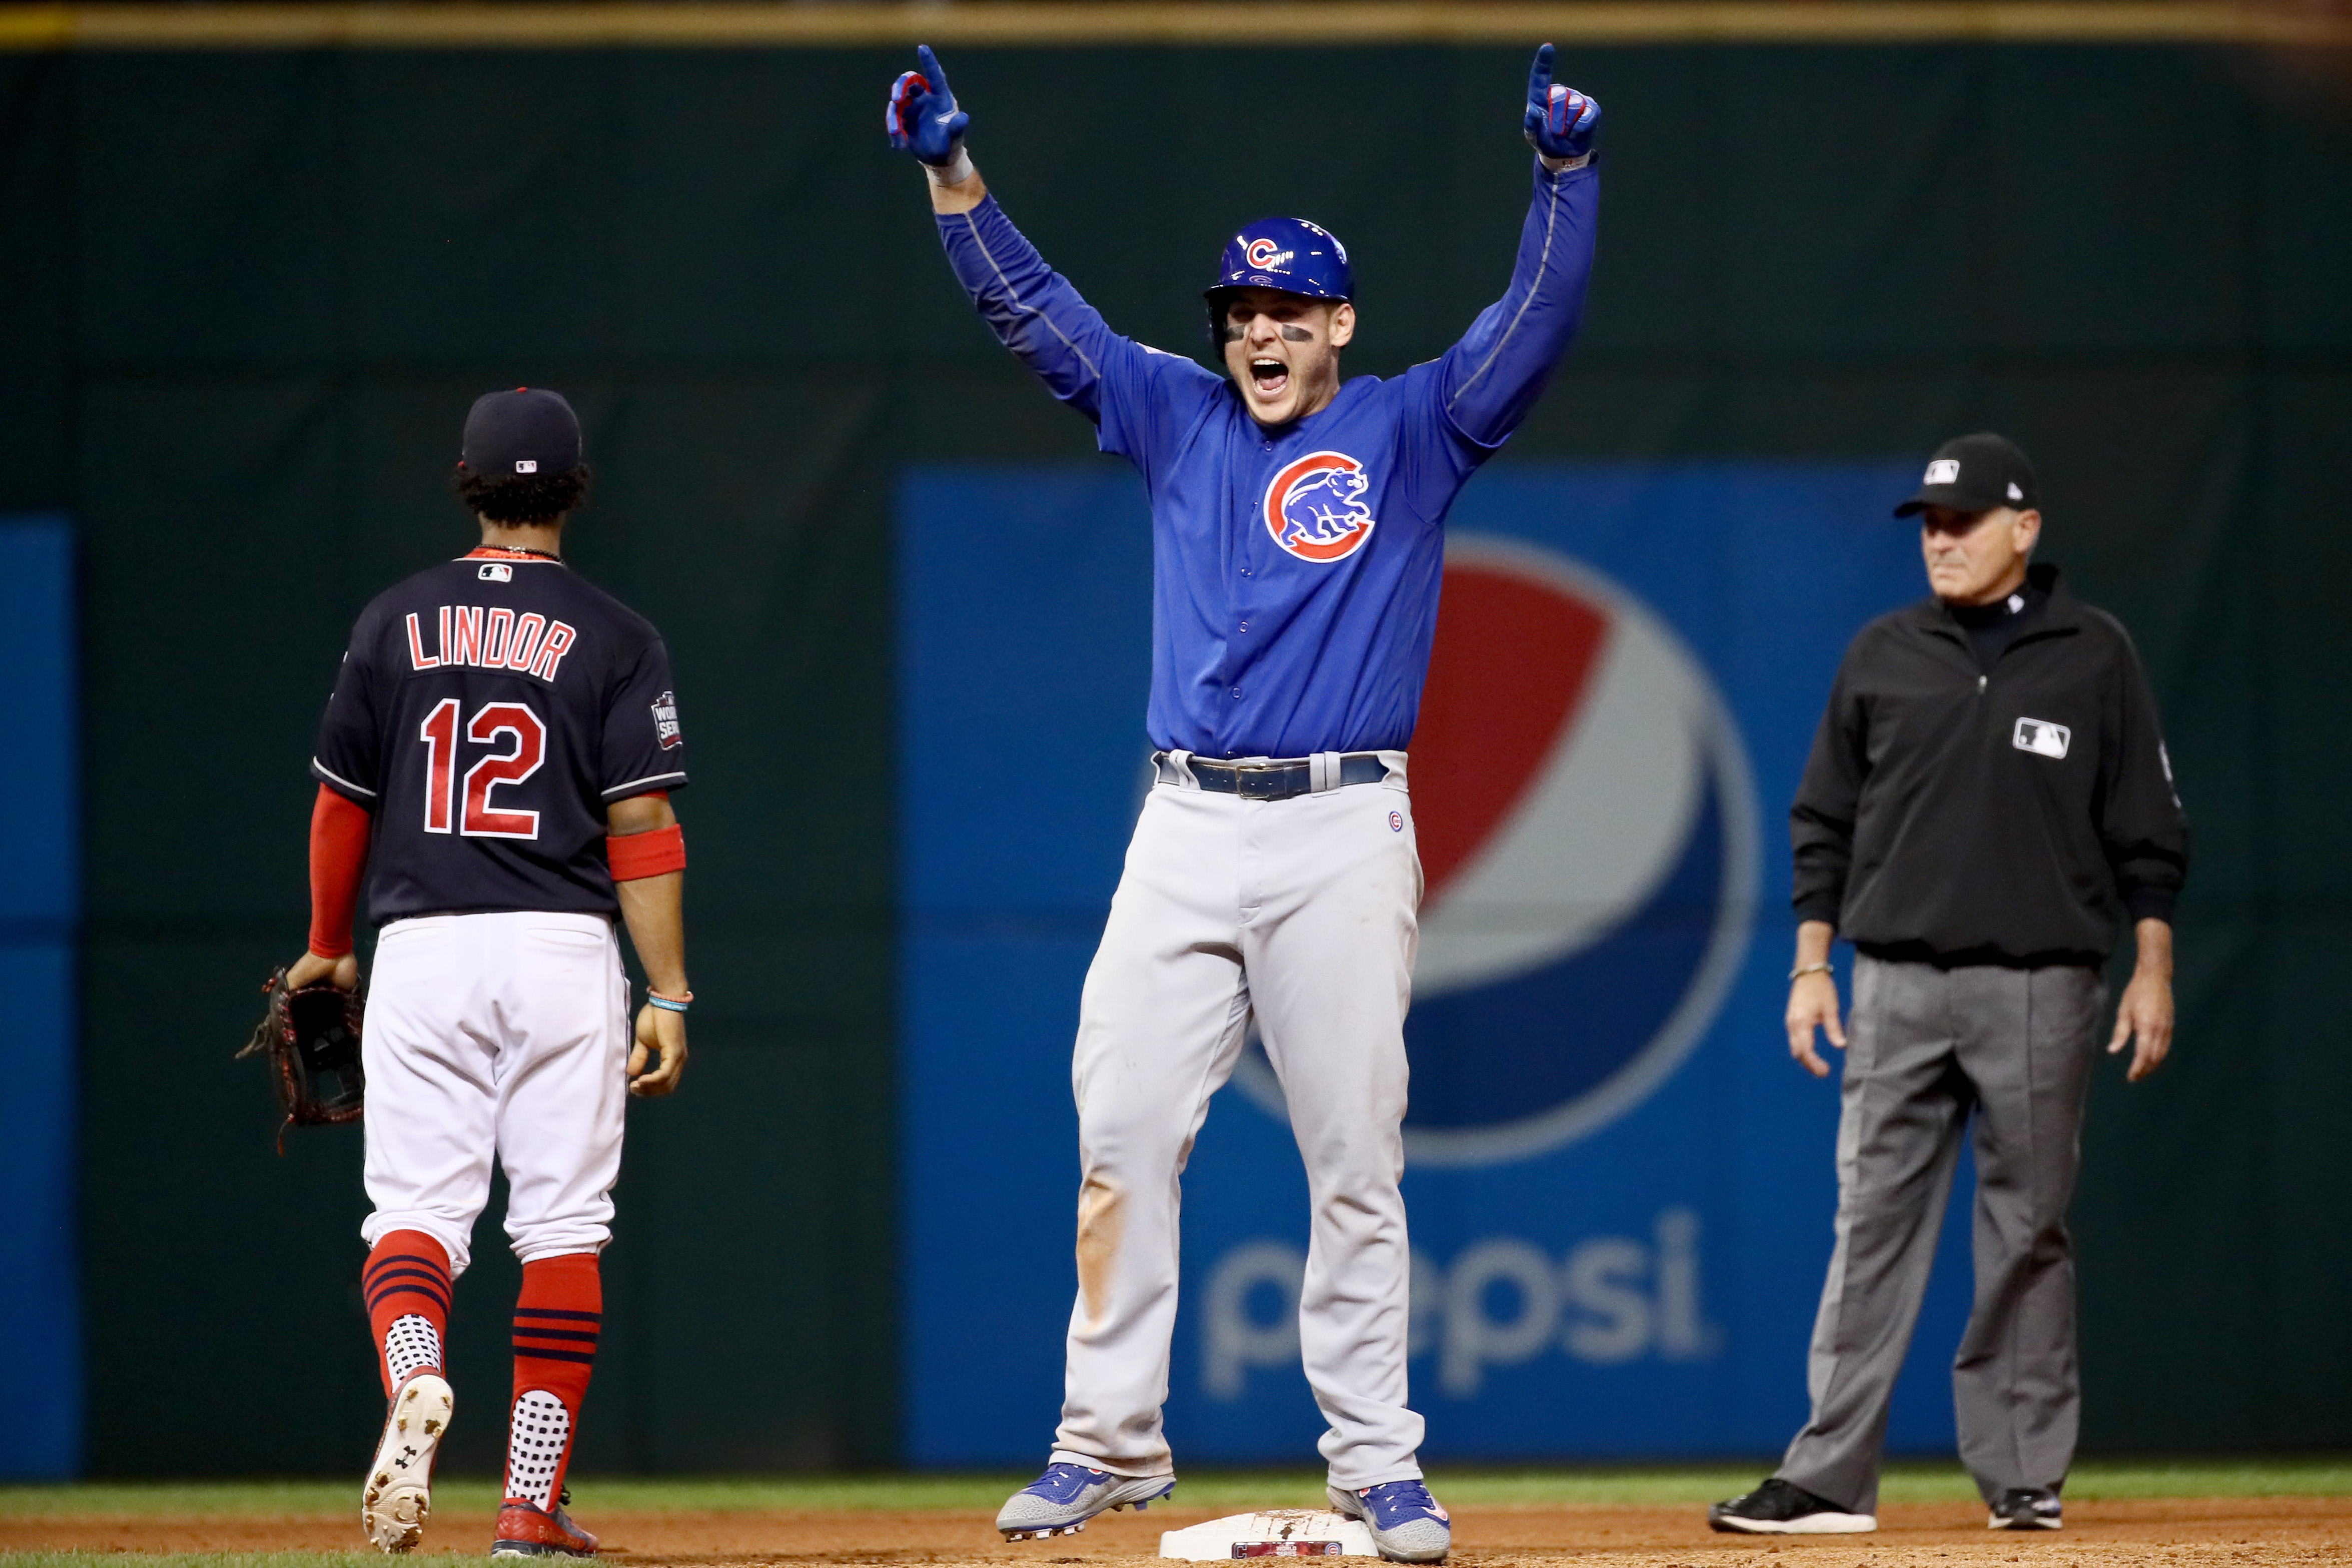 Indians lose to Cubs in World Series Game 7 heartbreaker - Sports